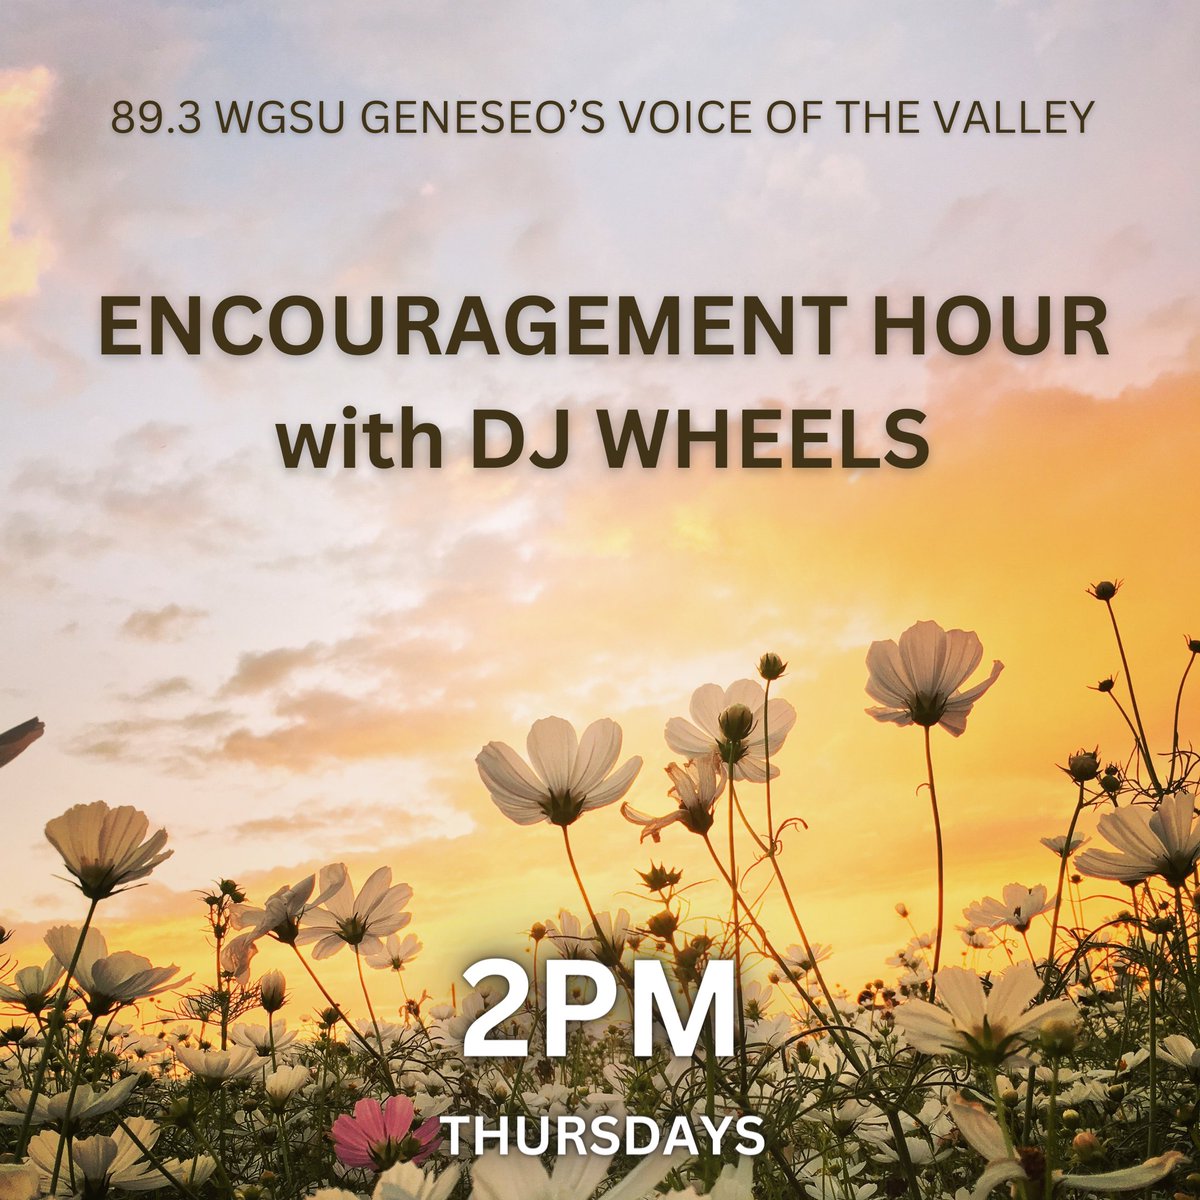 We've Encouragement Hour today at 2, so tune in to enjoy some uplifting songs to make this cloudy Thursday a bit brighter.

Listen Live: bit.ly/wgsu-live

#Geneseo #WGSU #CollegeRadio #SUNYGeneseo #SUNY #Music #Community #Entertainment #LocalDJ